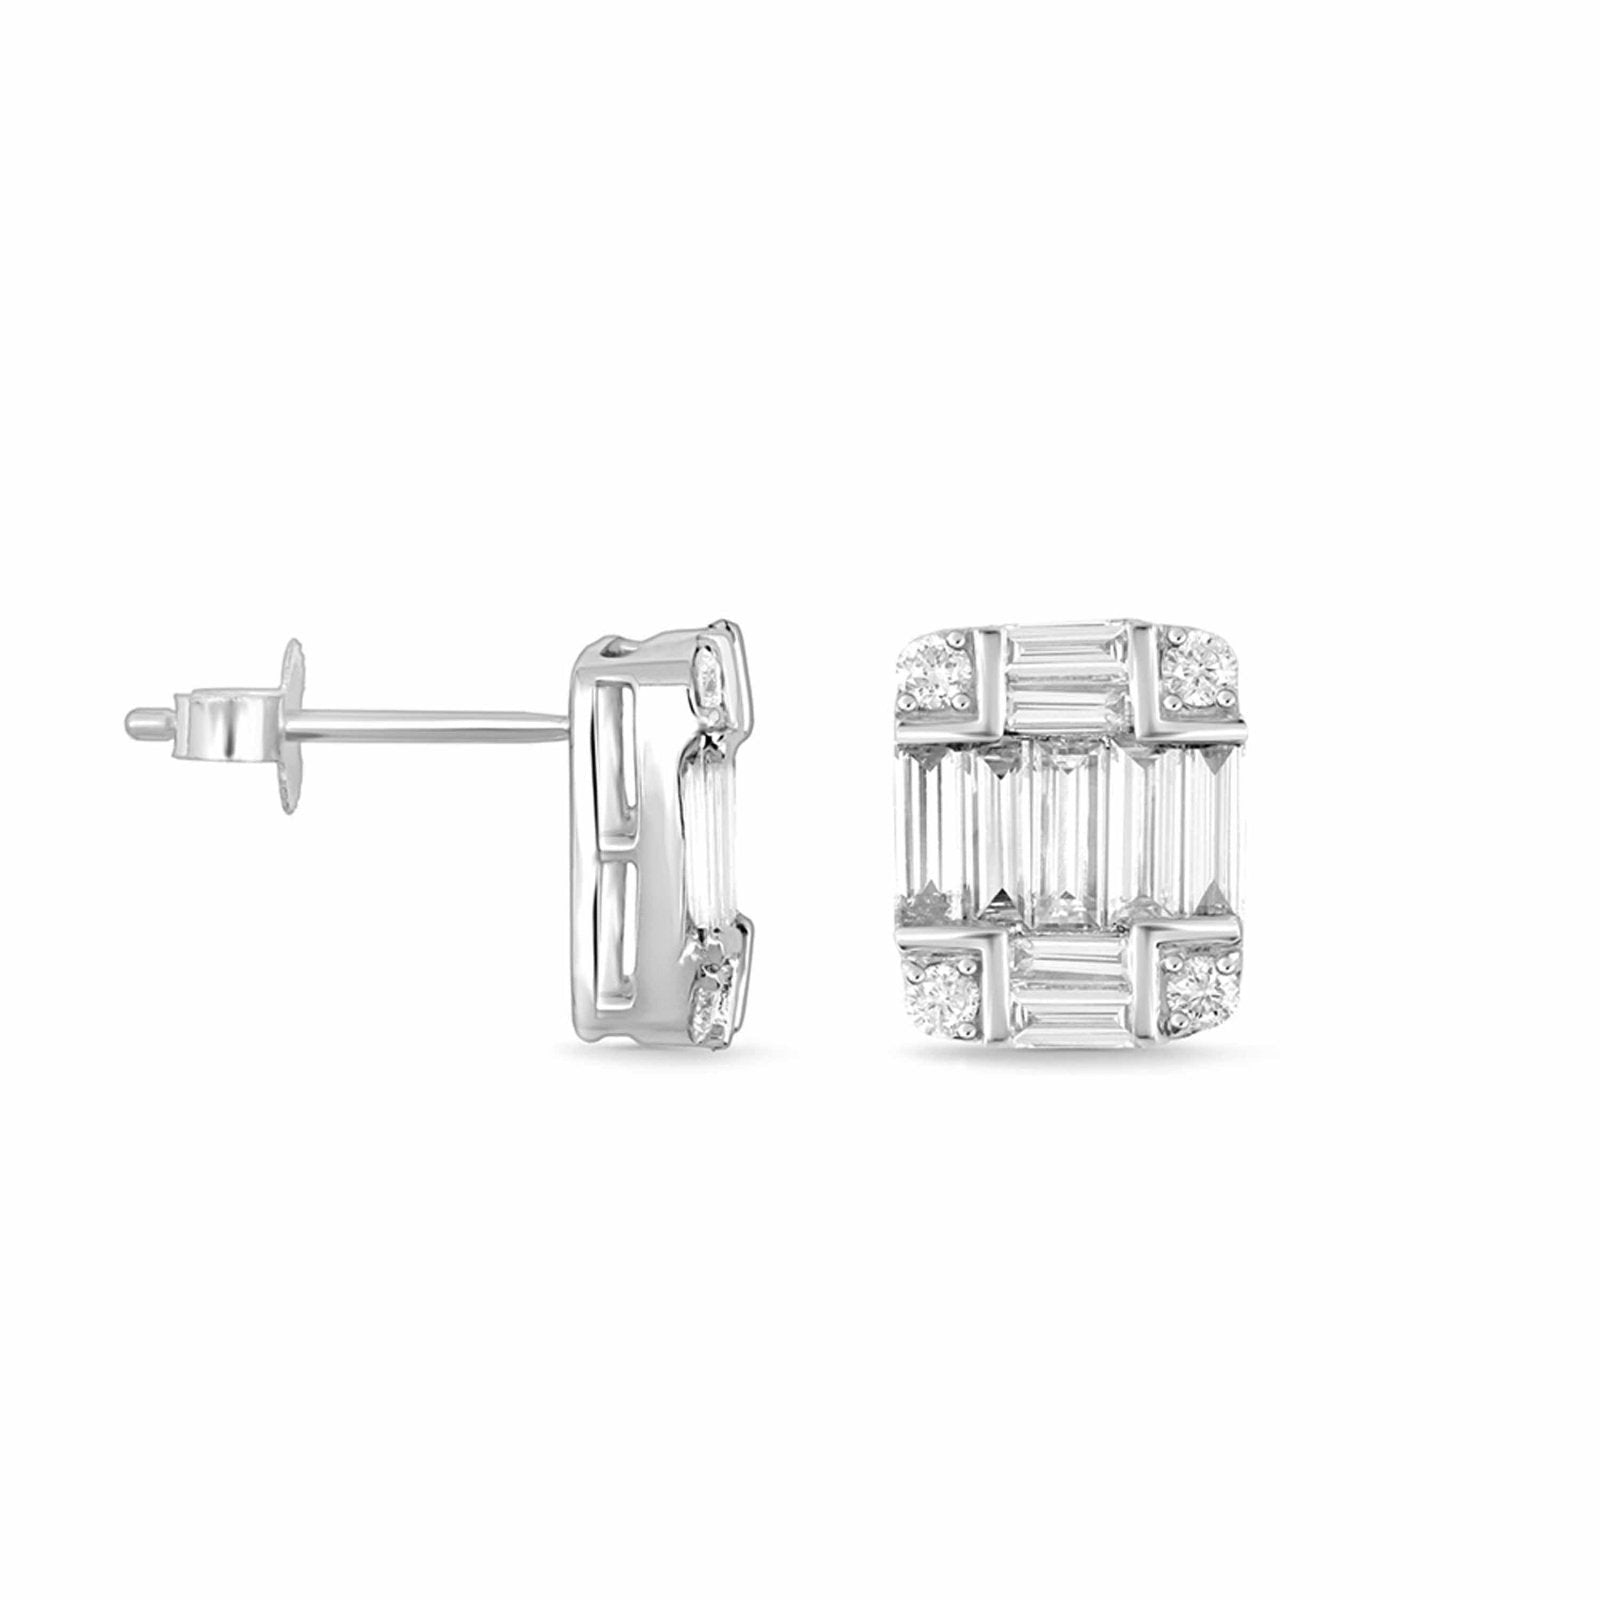 Diamond Baguette Illusion Stud Earrings in Solid 18k White Gold Earrings Estella Collection #product_description# 18k Colorless Gemstone Diamond #tag4# #tag5# #tag6# #tag7# #tag8# #tag9# #tag10#